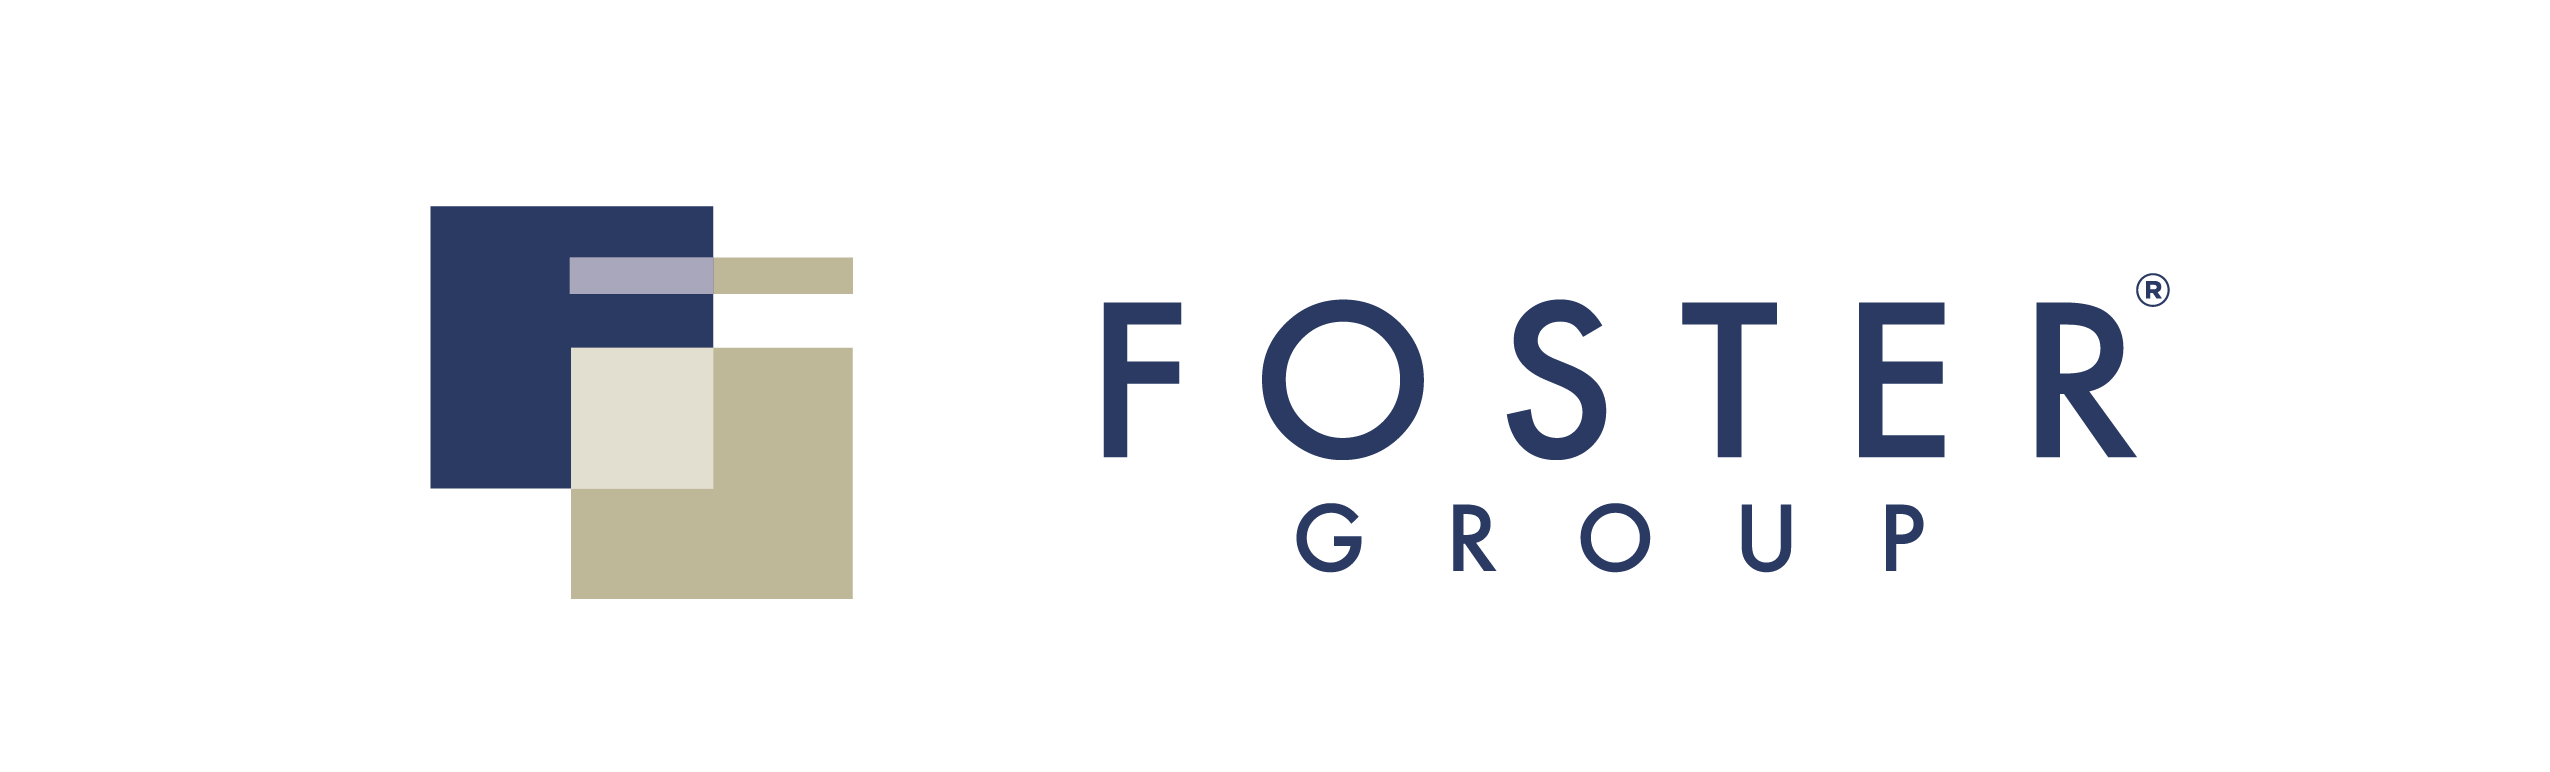 Foster Group